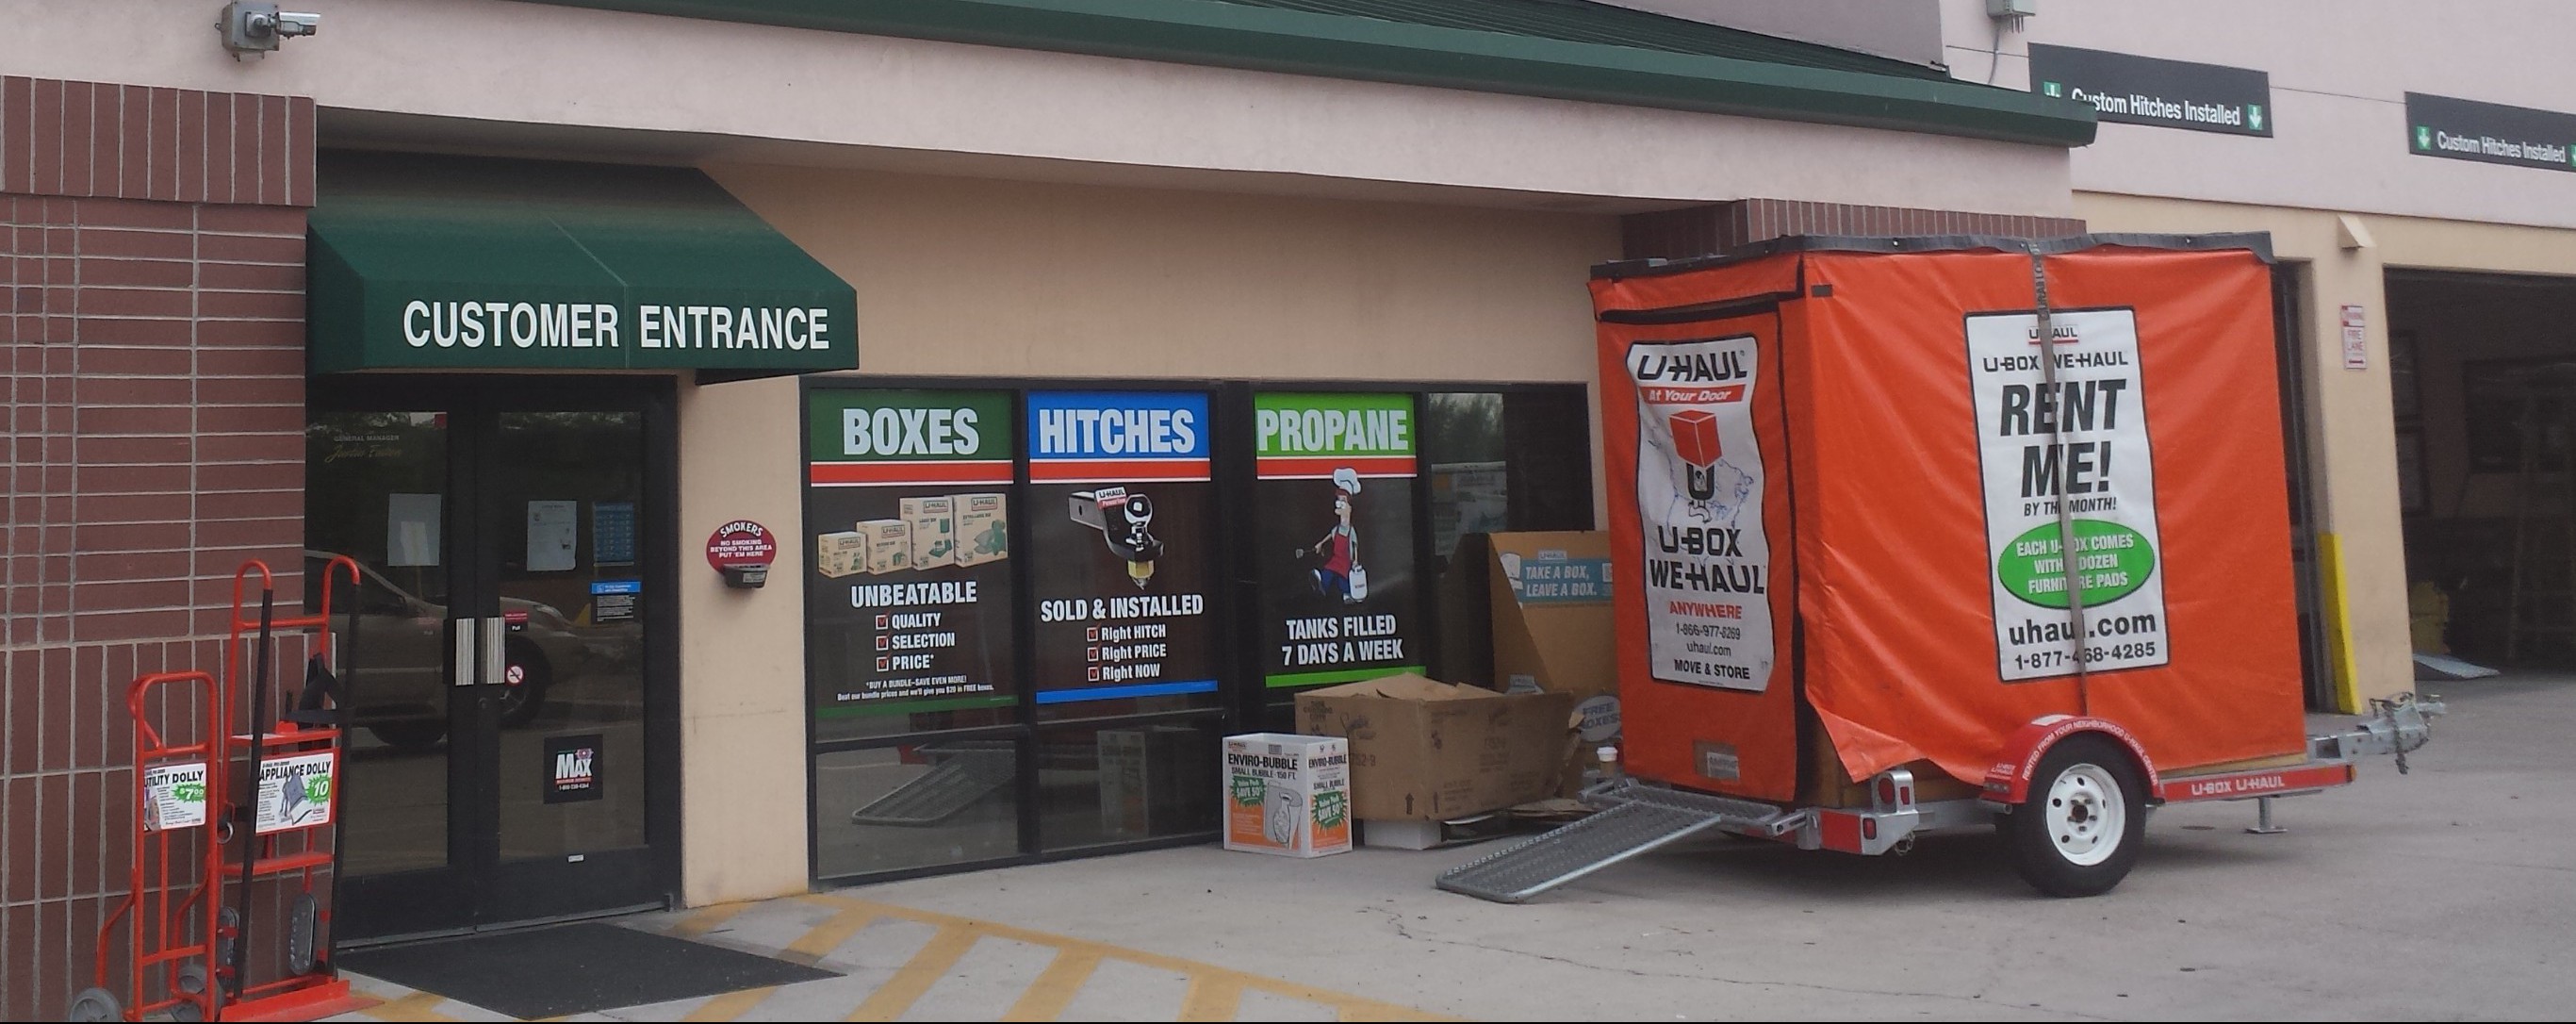 U-Haul Company of Northwest California is offering 30 days free use of U-Box portable moving and storage containers to residents of Lake, Napa and Sonoma Counties and surrounding areas who have been evacuated from their homes or need to move belongings away from the recent outbreak of wildfires.